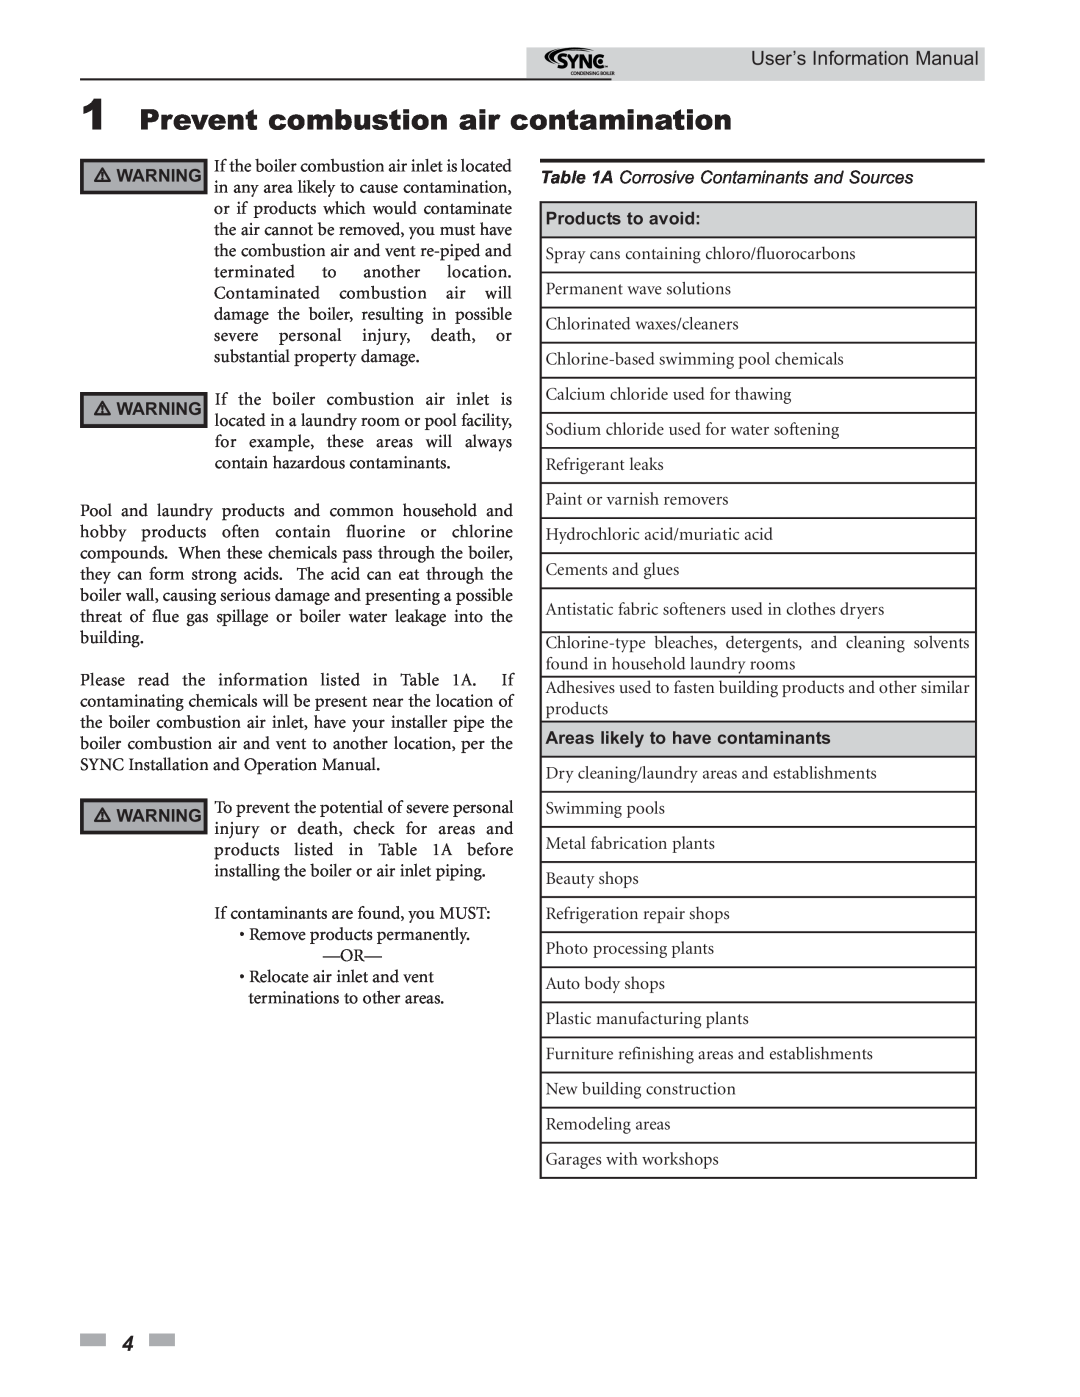 Lochinvar 1.5, 1.3 1Prevent combustion air contamination, User’s Information Manual, A Corrosive Contaminants and Sources 